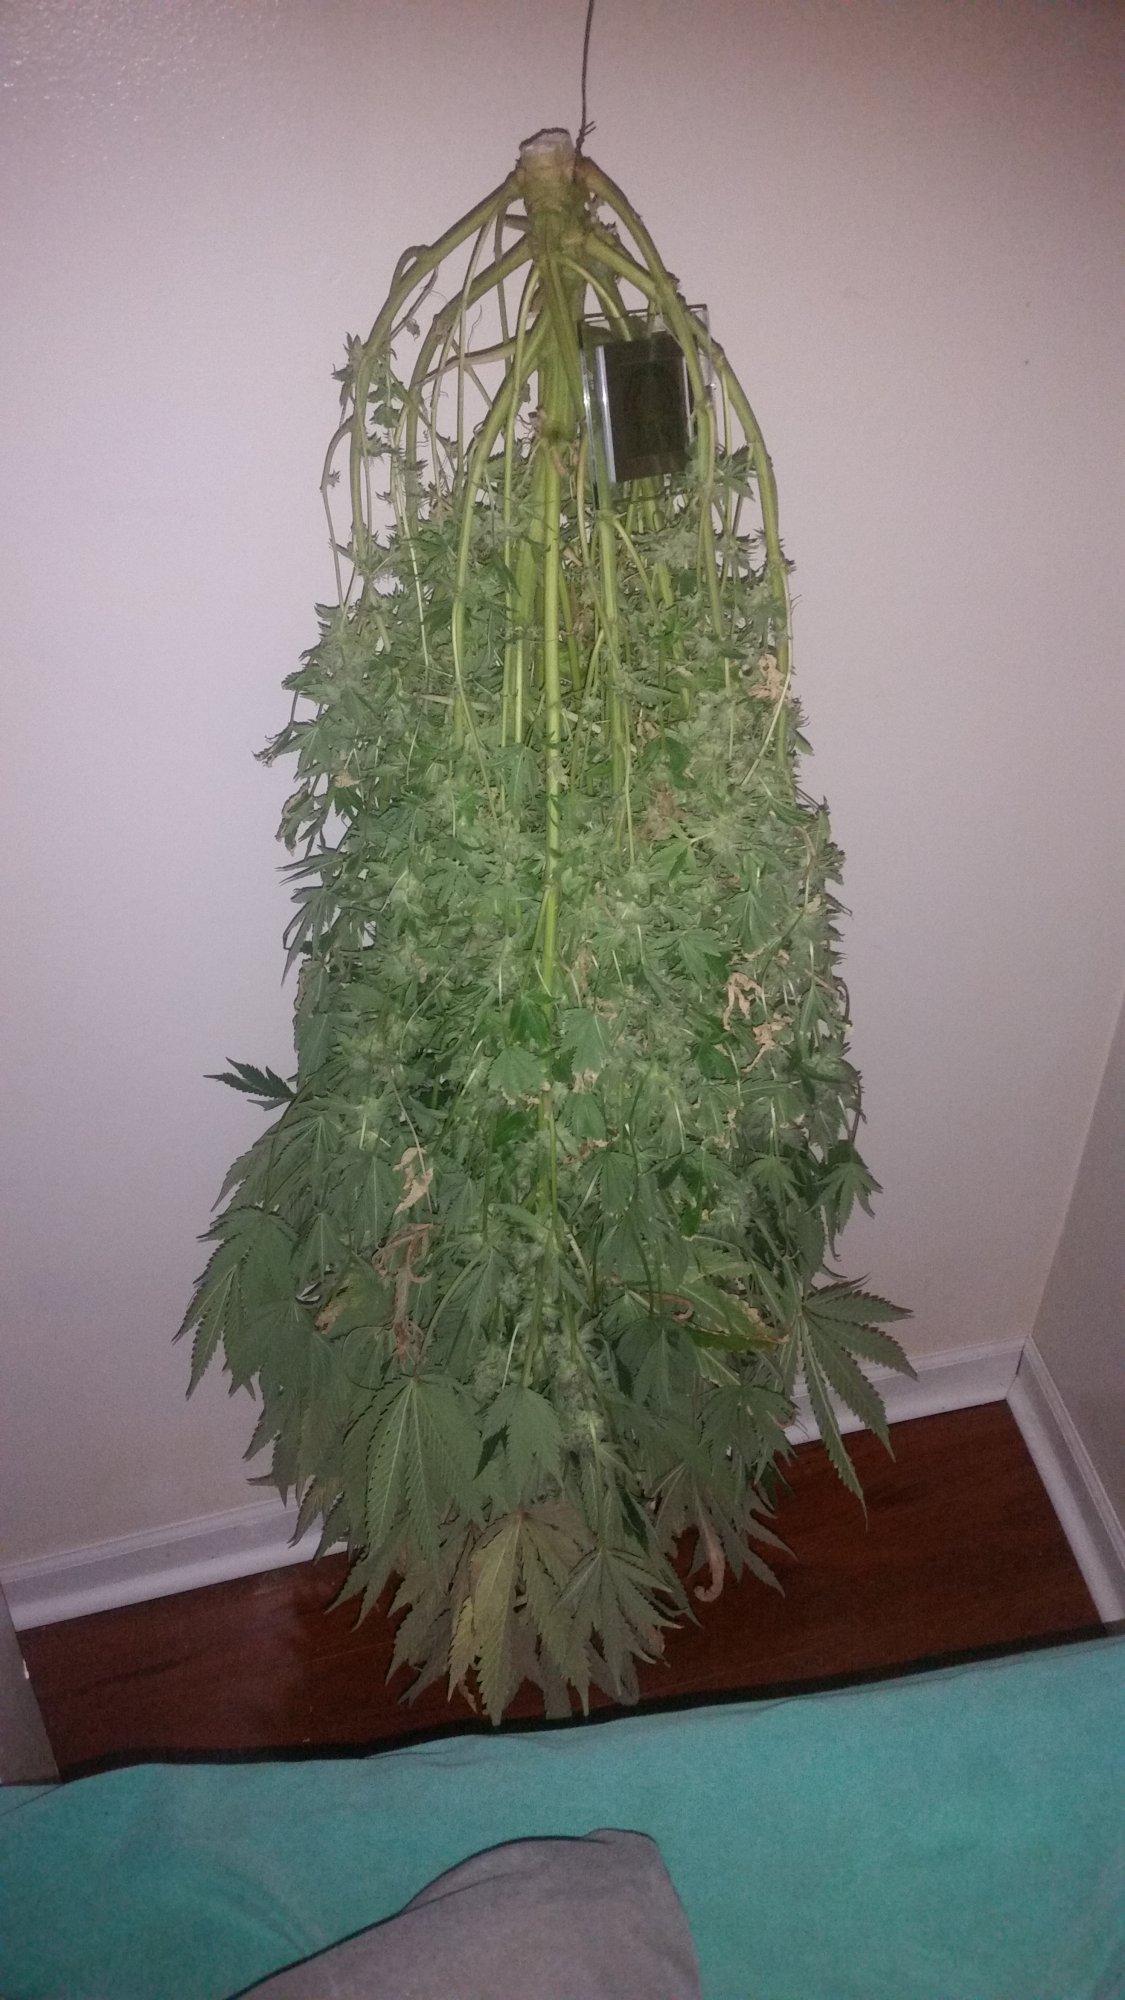 How to best dry a very bushy plant